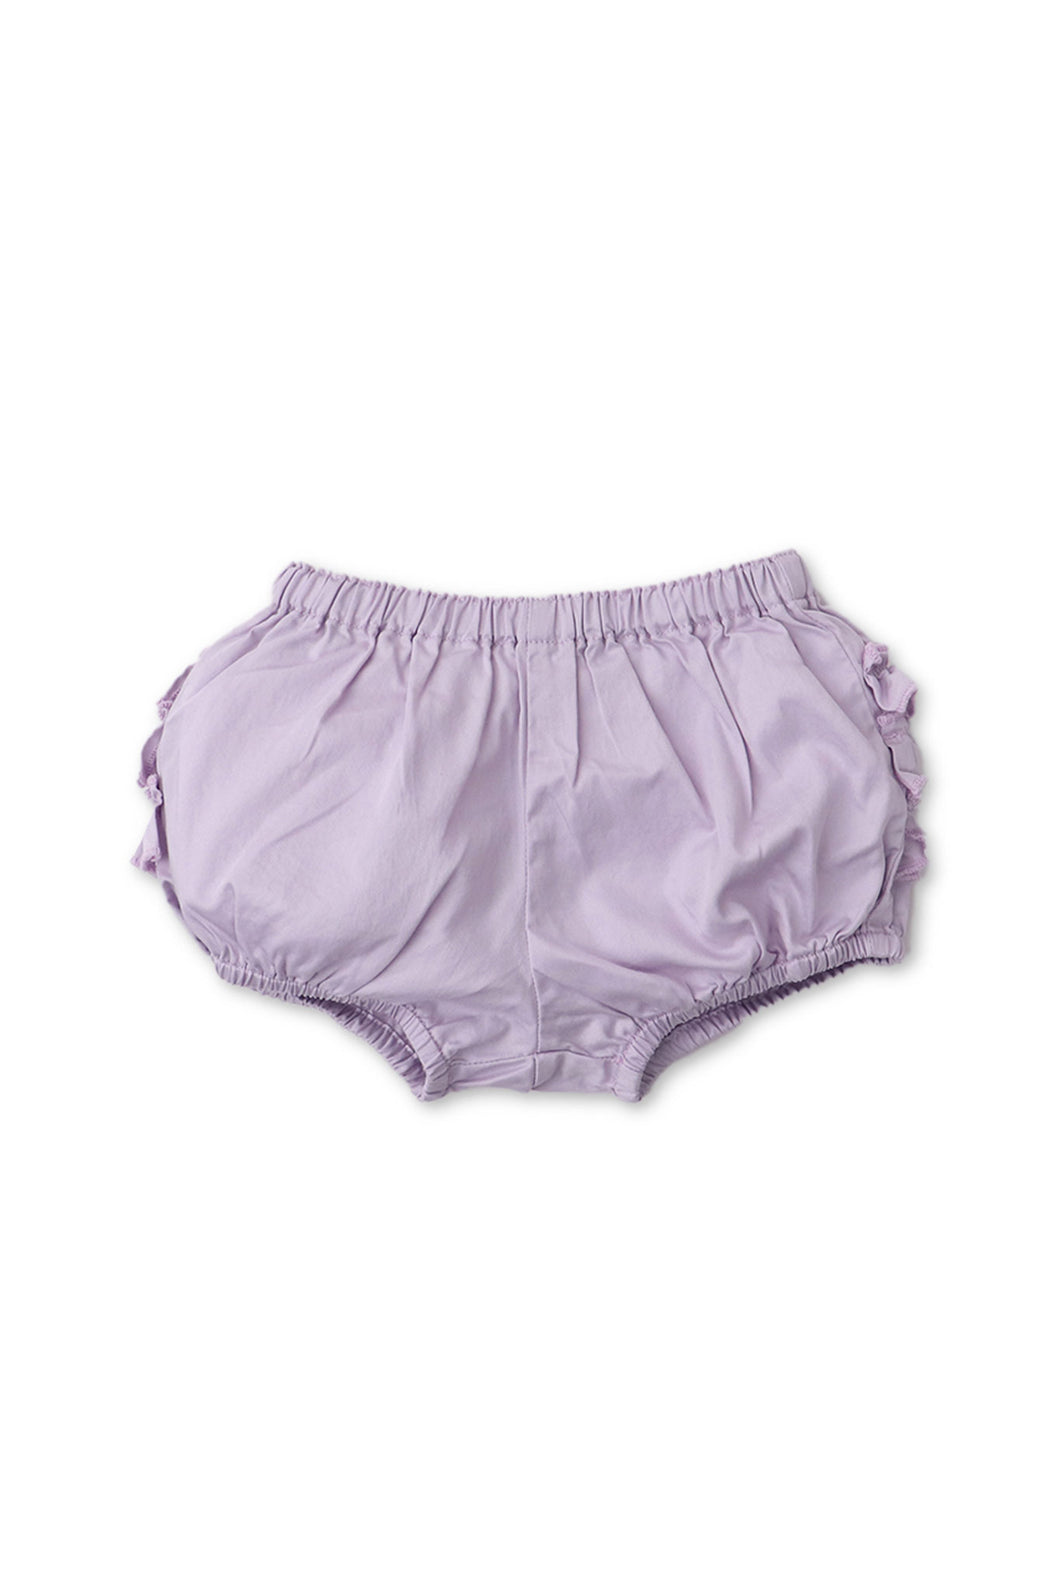 Gingersnaps Plain Woven Bloomers with Ruffles